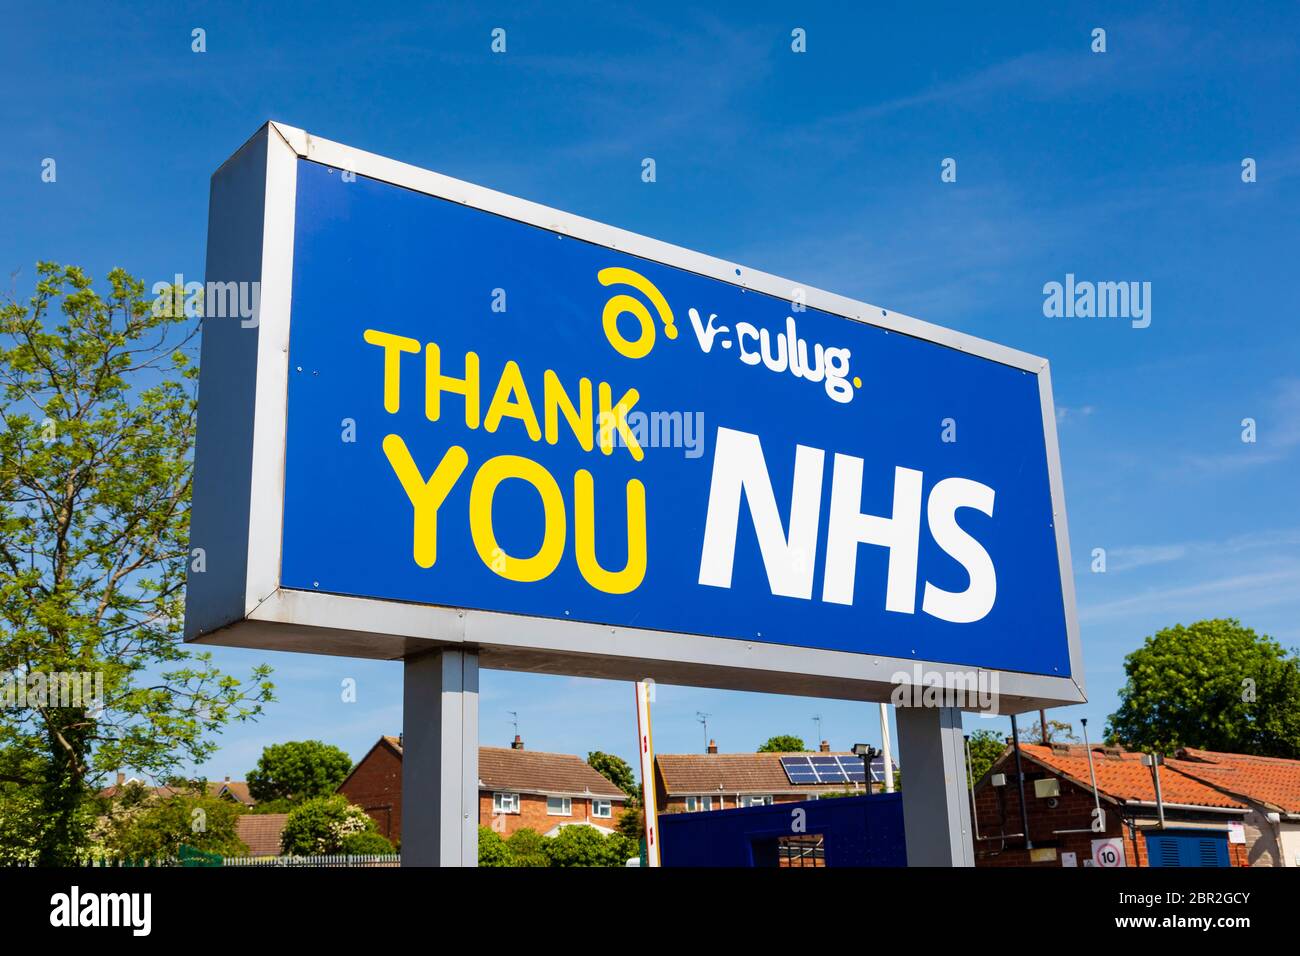 “Thank you NHS” message on the Vaculug factory sign during the Covid 19 corona virus pandemic.  Gonerby Hill Foot, Grantham, Lincolnshire, England. Stock Photo